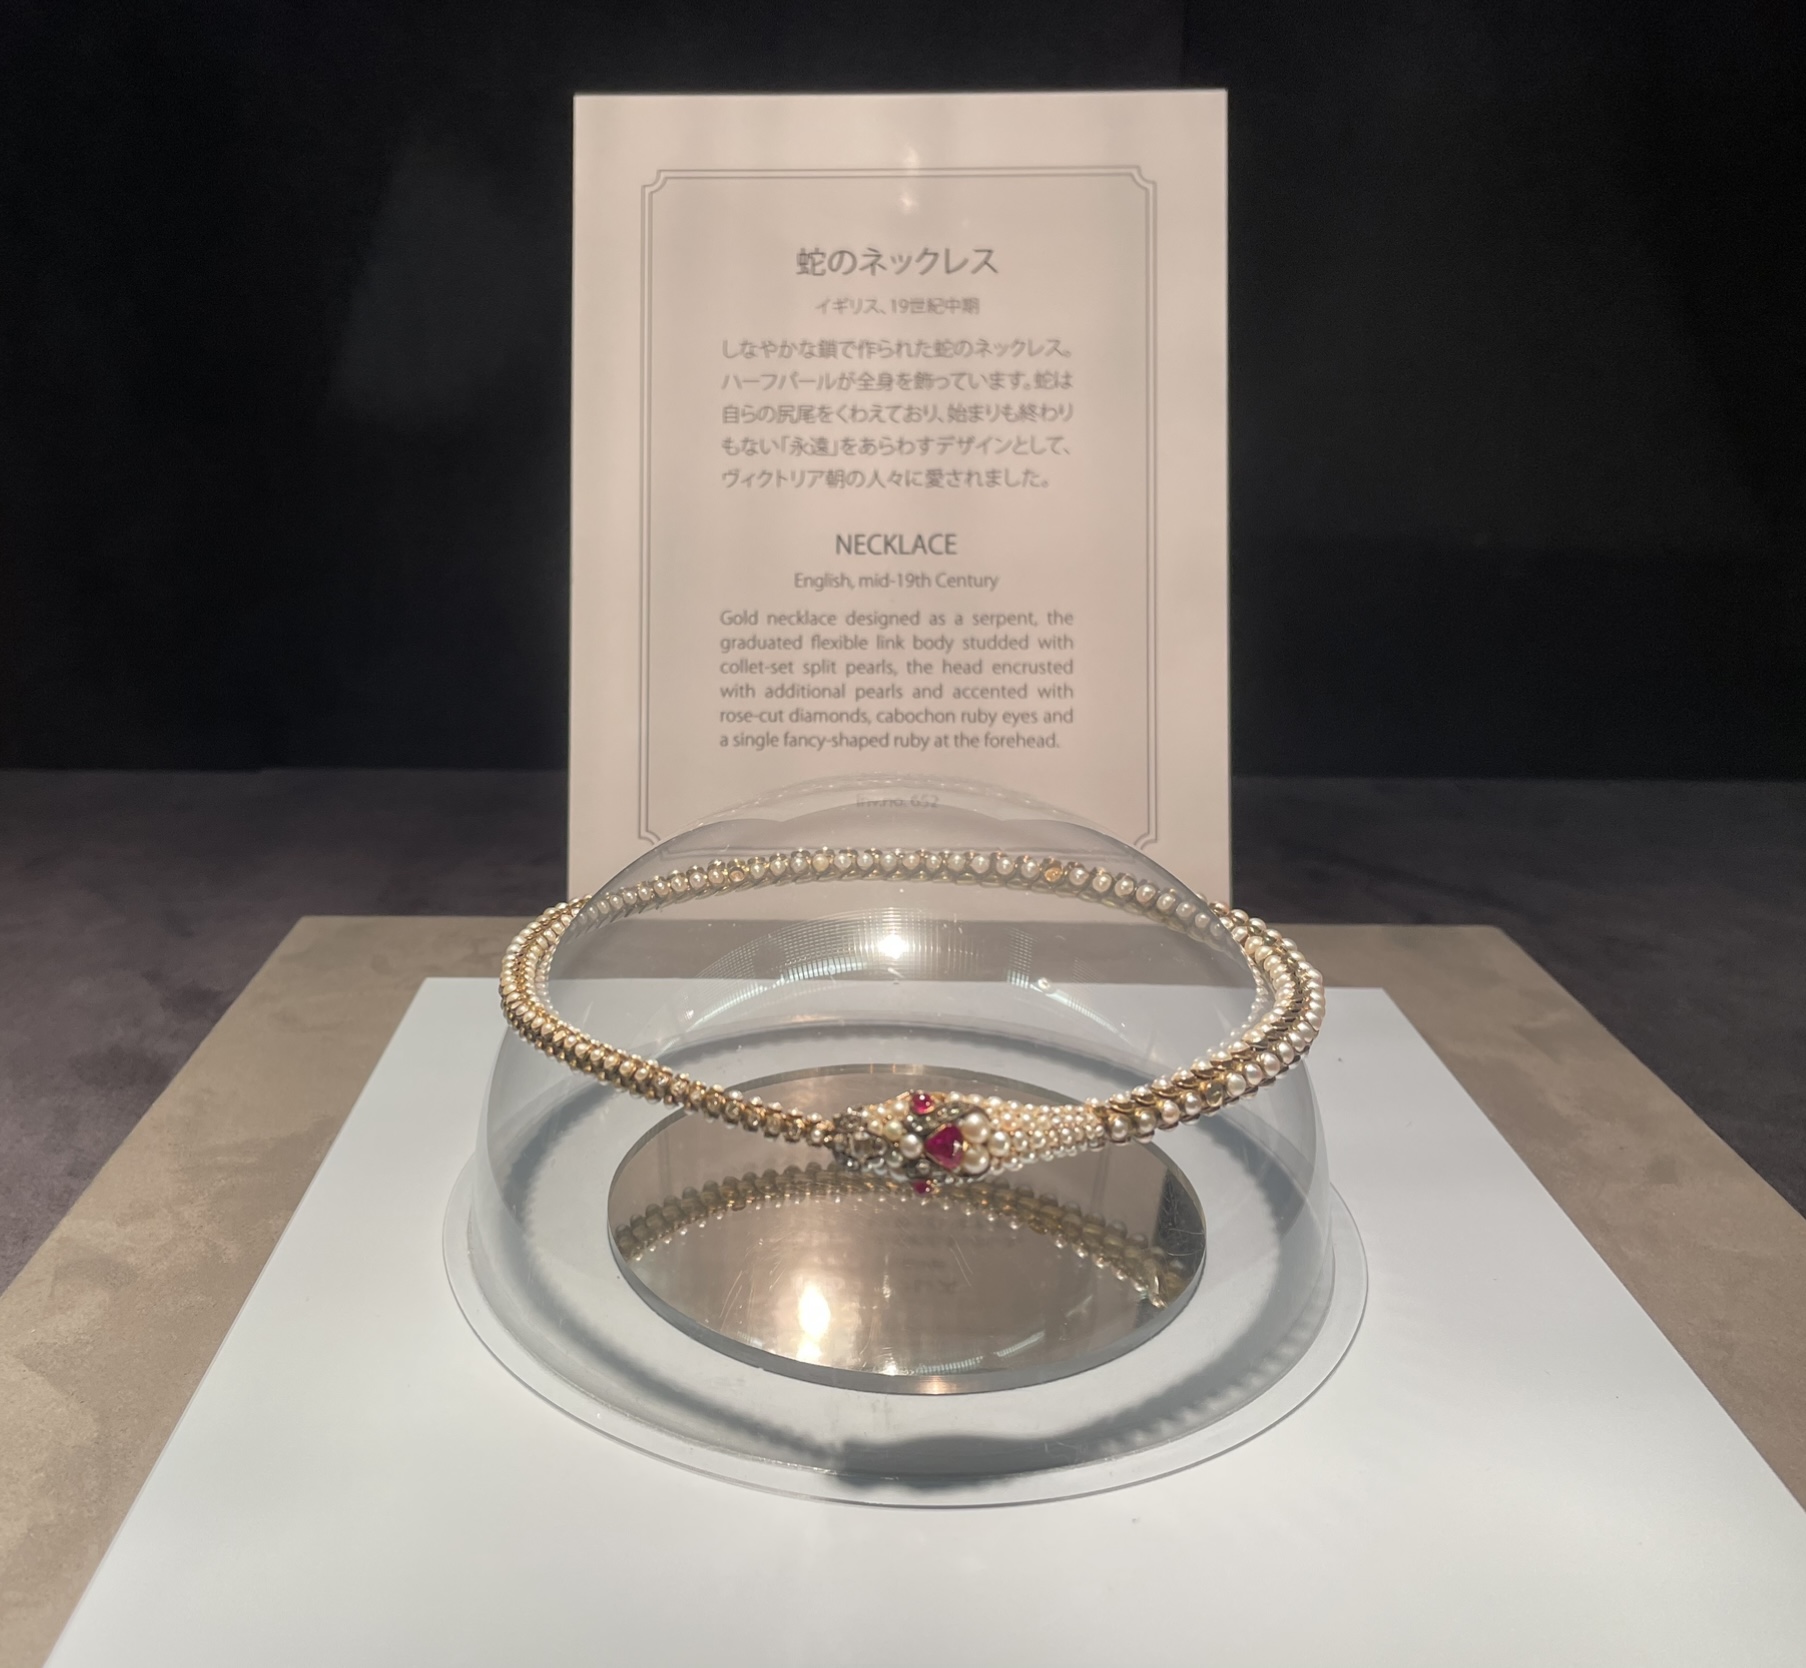 Golden Serpent Necklace - Mikimoto Pearl Museum